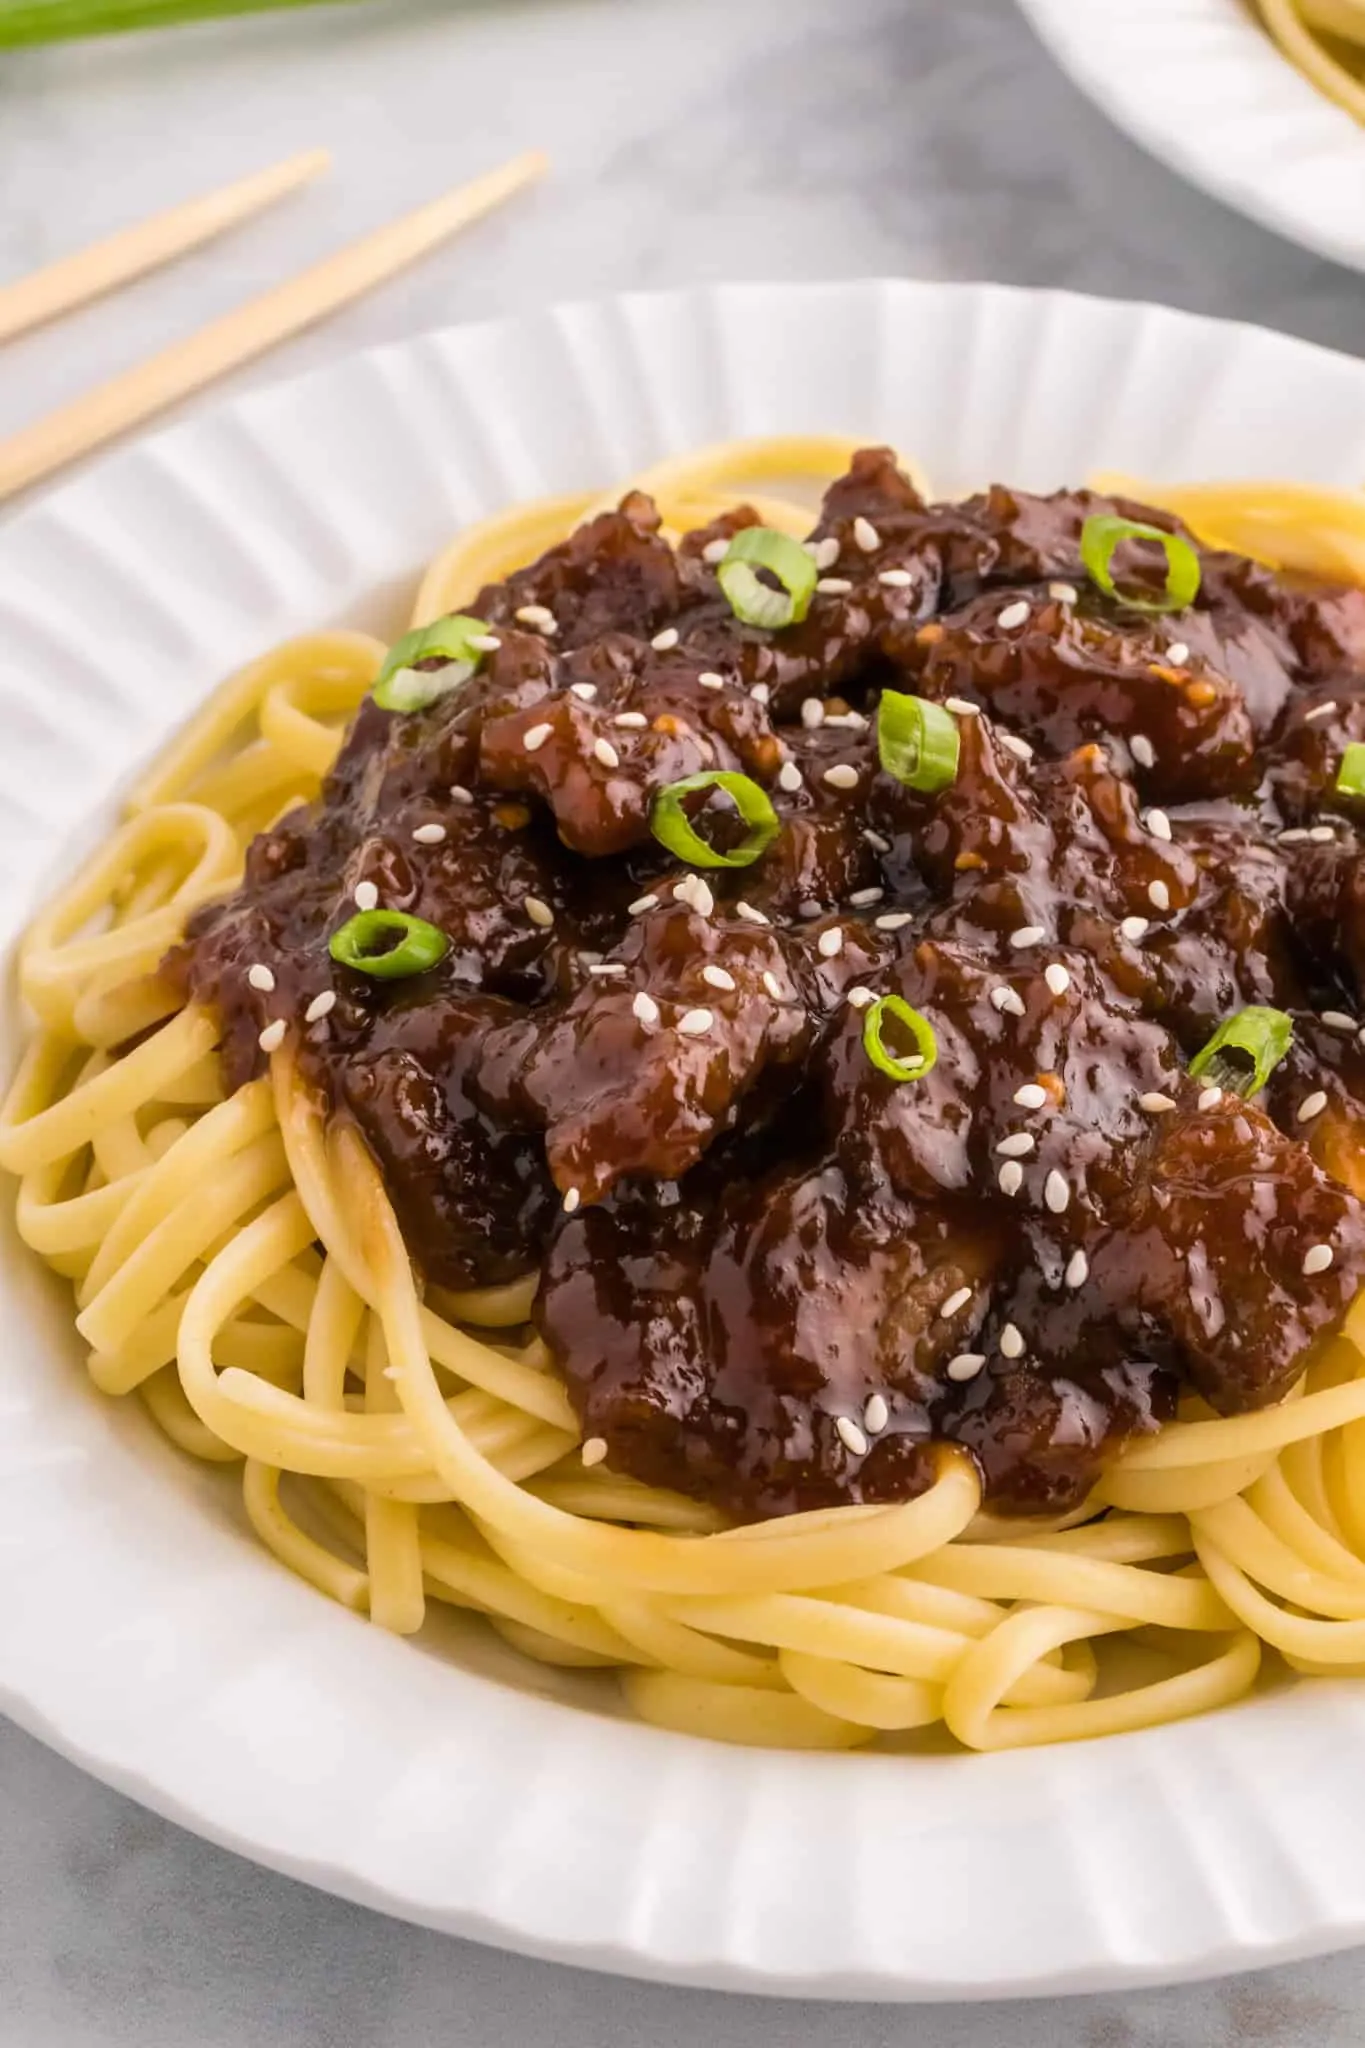 Mongolian Beef is a delicious dish with crispy fried steak strips cooked simmered in a brown sugar and soy sauce mixture served over noodles or rice and garnished with sesame seeds and green onions.